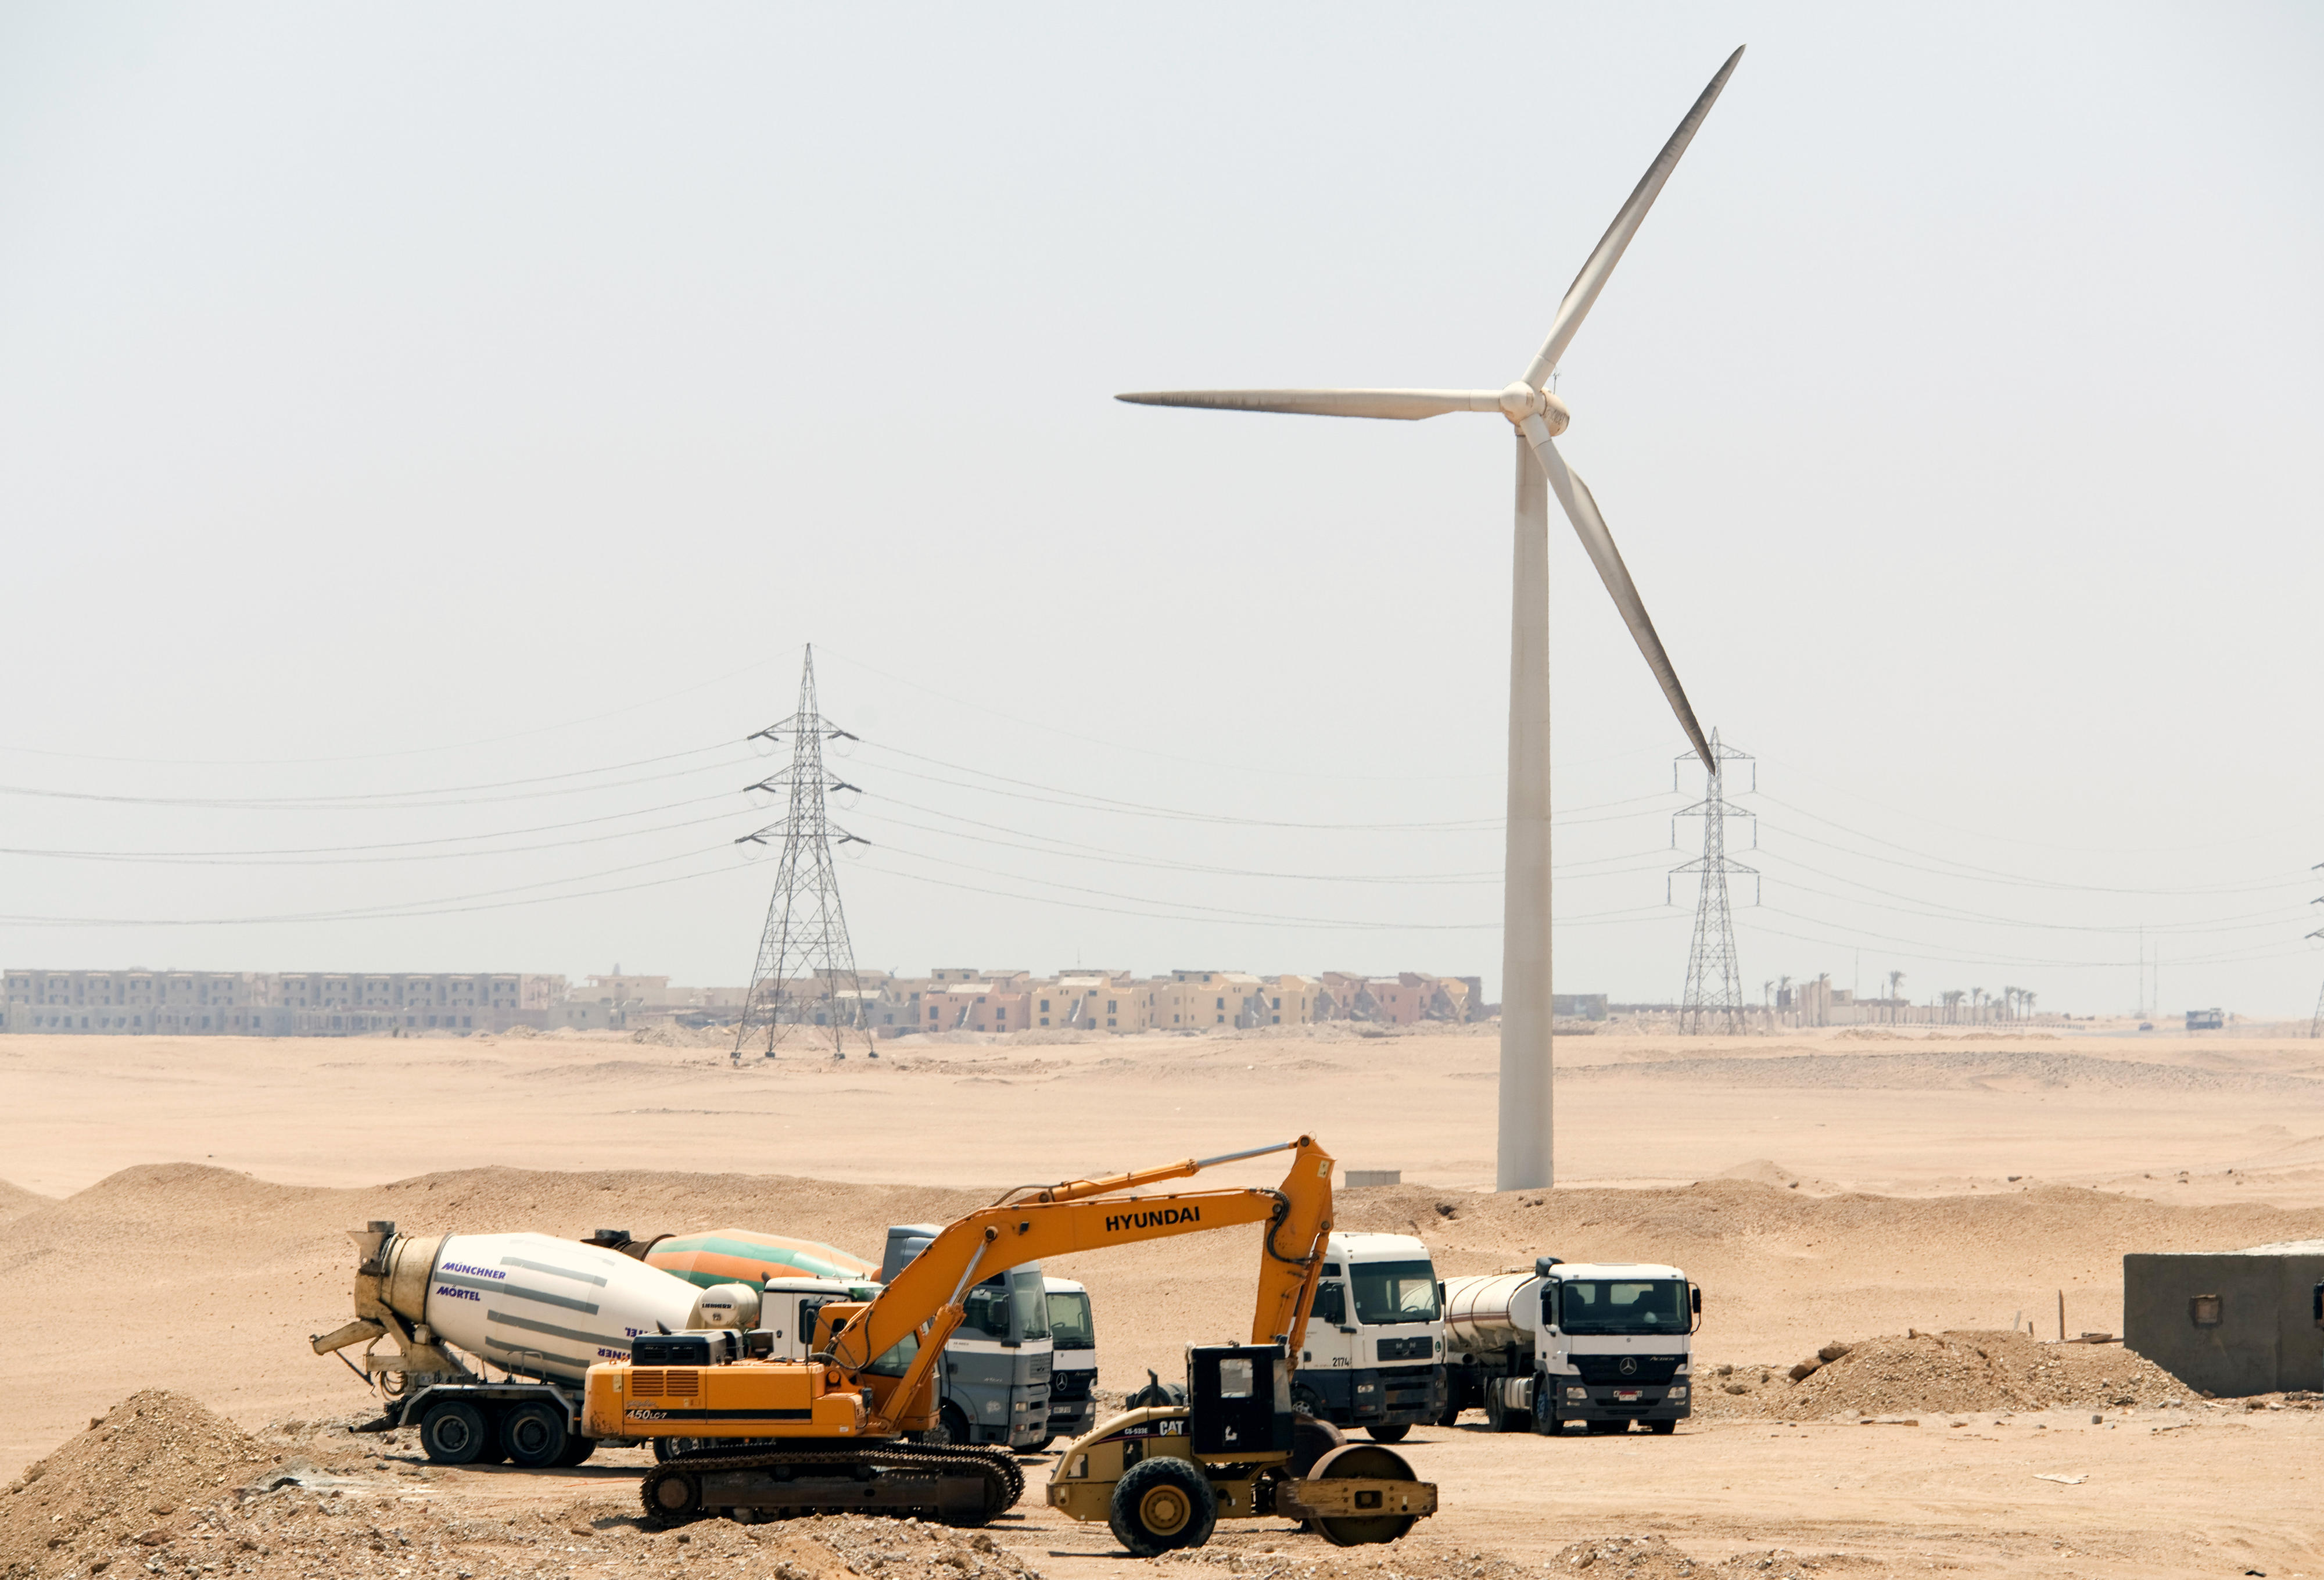 Construction site vehicles in front of a wind turbine in Egypt